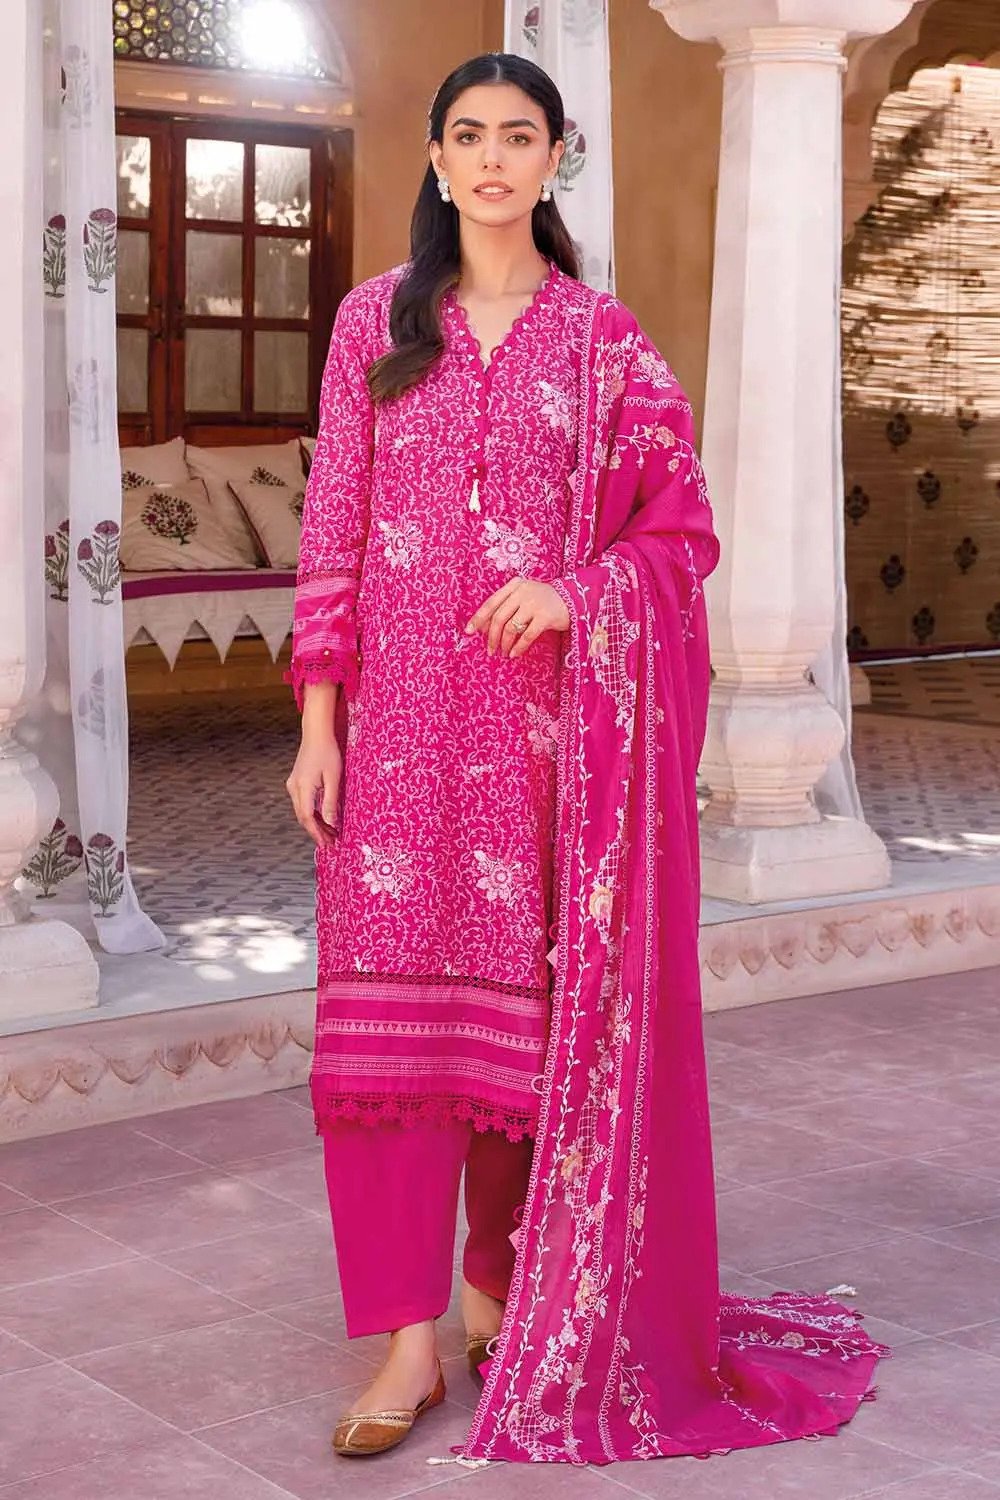 3PC Lawn Unstitched Digital Printed Crochet Lace Suit With Denting Dupatta DN-32020